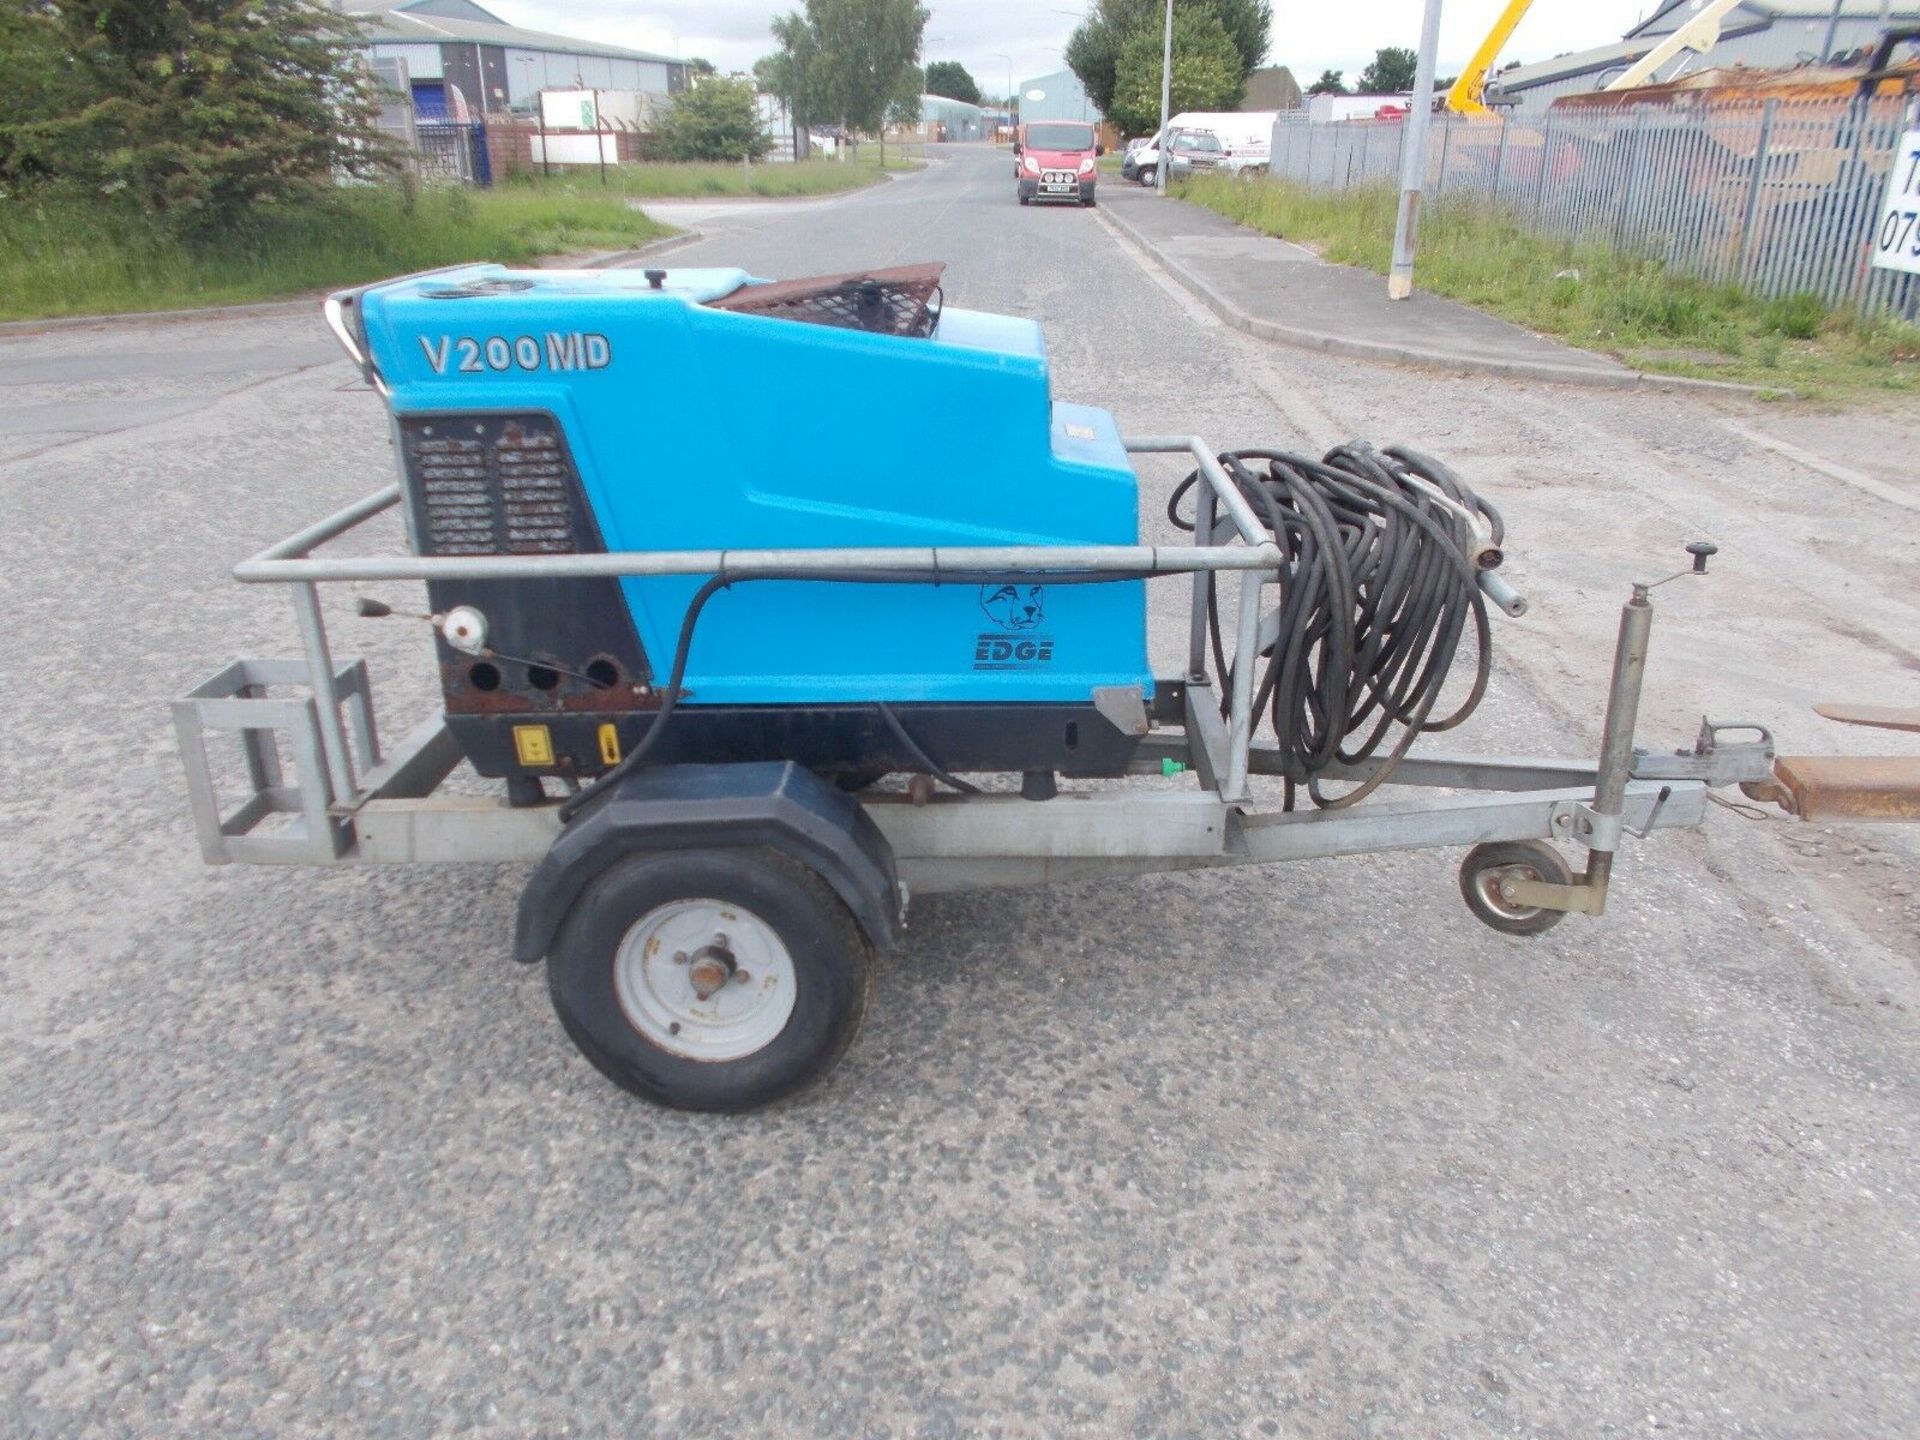 Edge V 200 MD Towable Hot and Cold Diesel Engined Pressure Washer - Image 4 of 7